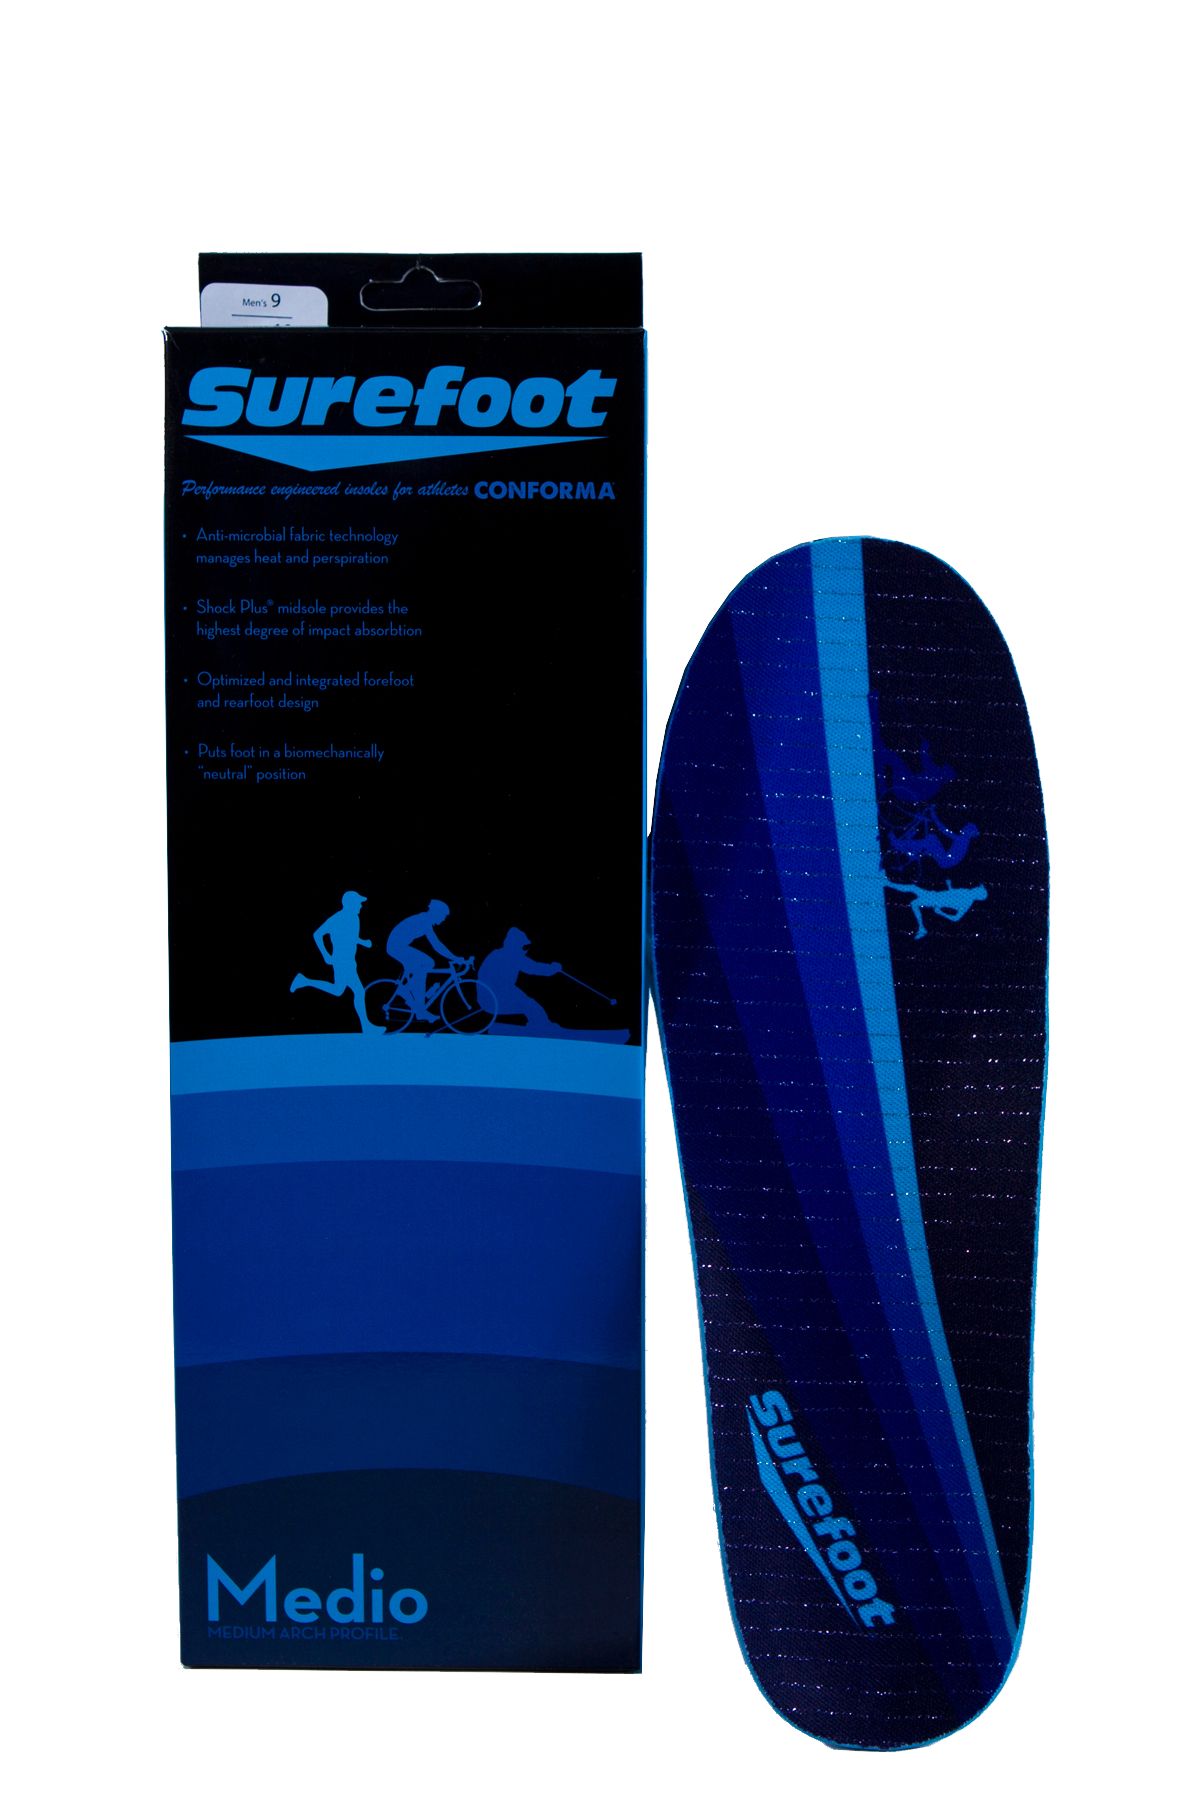 Image of the Conforma Medio (medium arch) Insole by Surefoot and it's box in Blue/Black